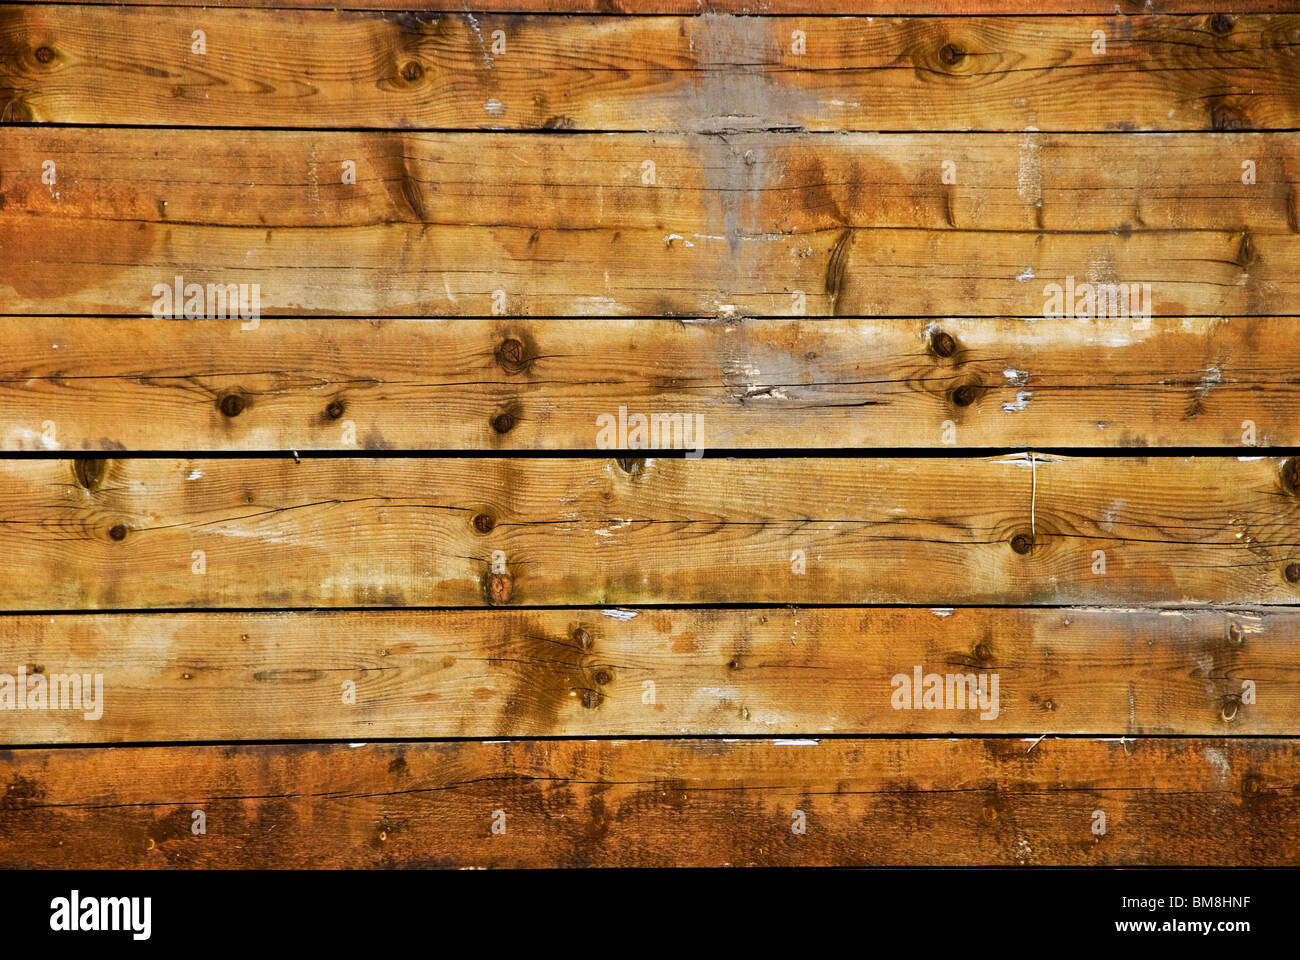 wood planks as background Stock Photo